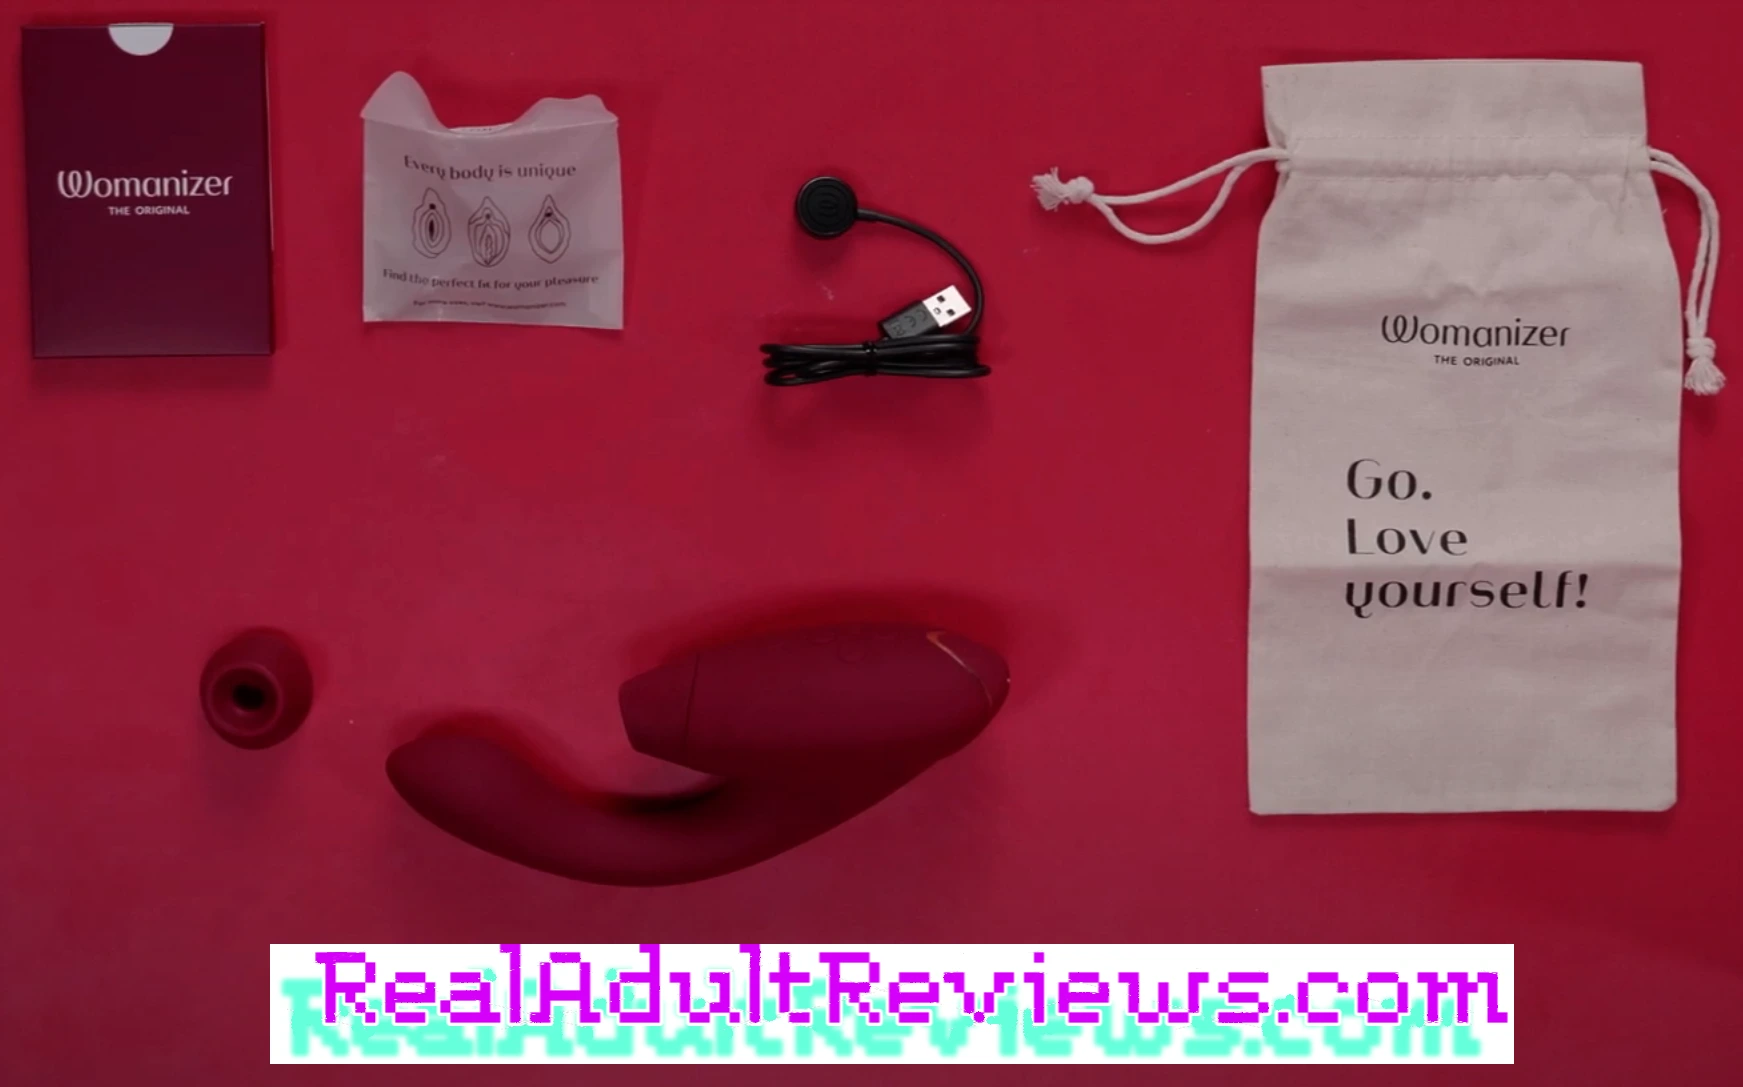 Womanizer Duo Honest Review: How This Homely Vibrator Can Become a Favorite Sex Toy?